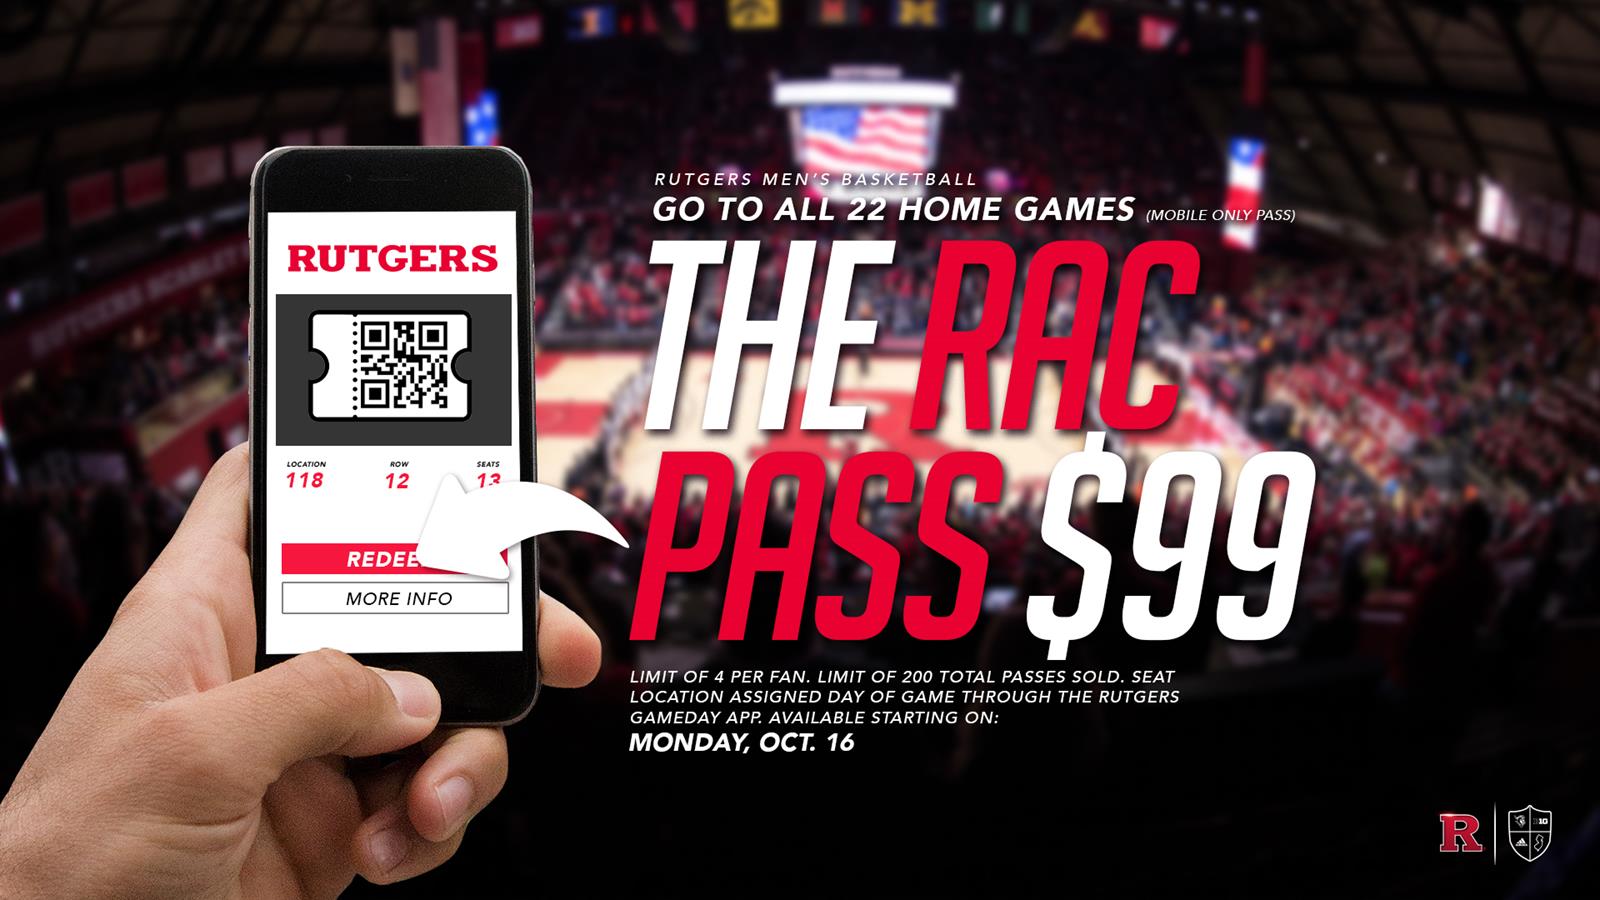 Game Red RAC Logo - “RAC Pass” Provides Access to all 22 Men's Basketball Games for $99 ...